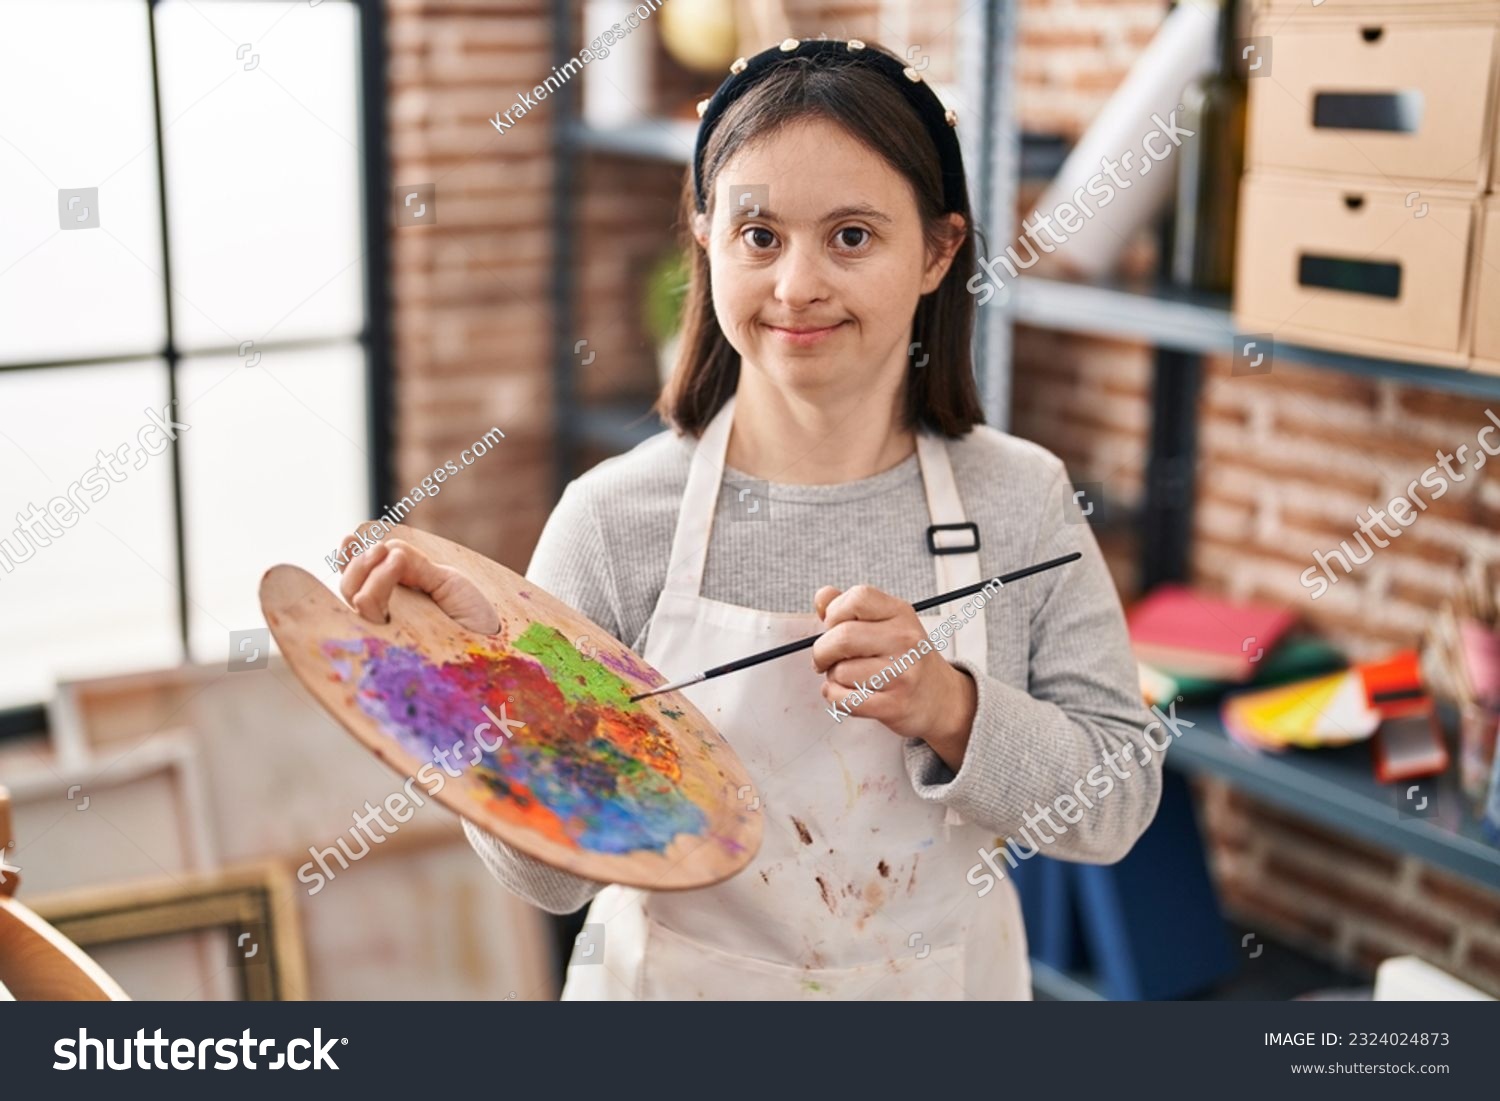 Young woman with down syndrome smiling confident holding paintbrush and palette at art studio #2324024873